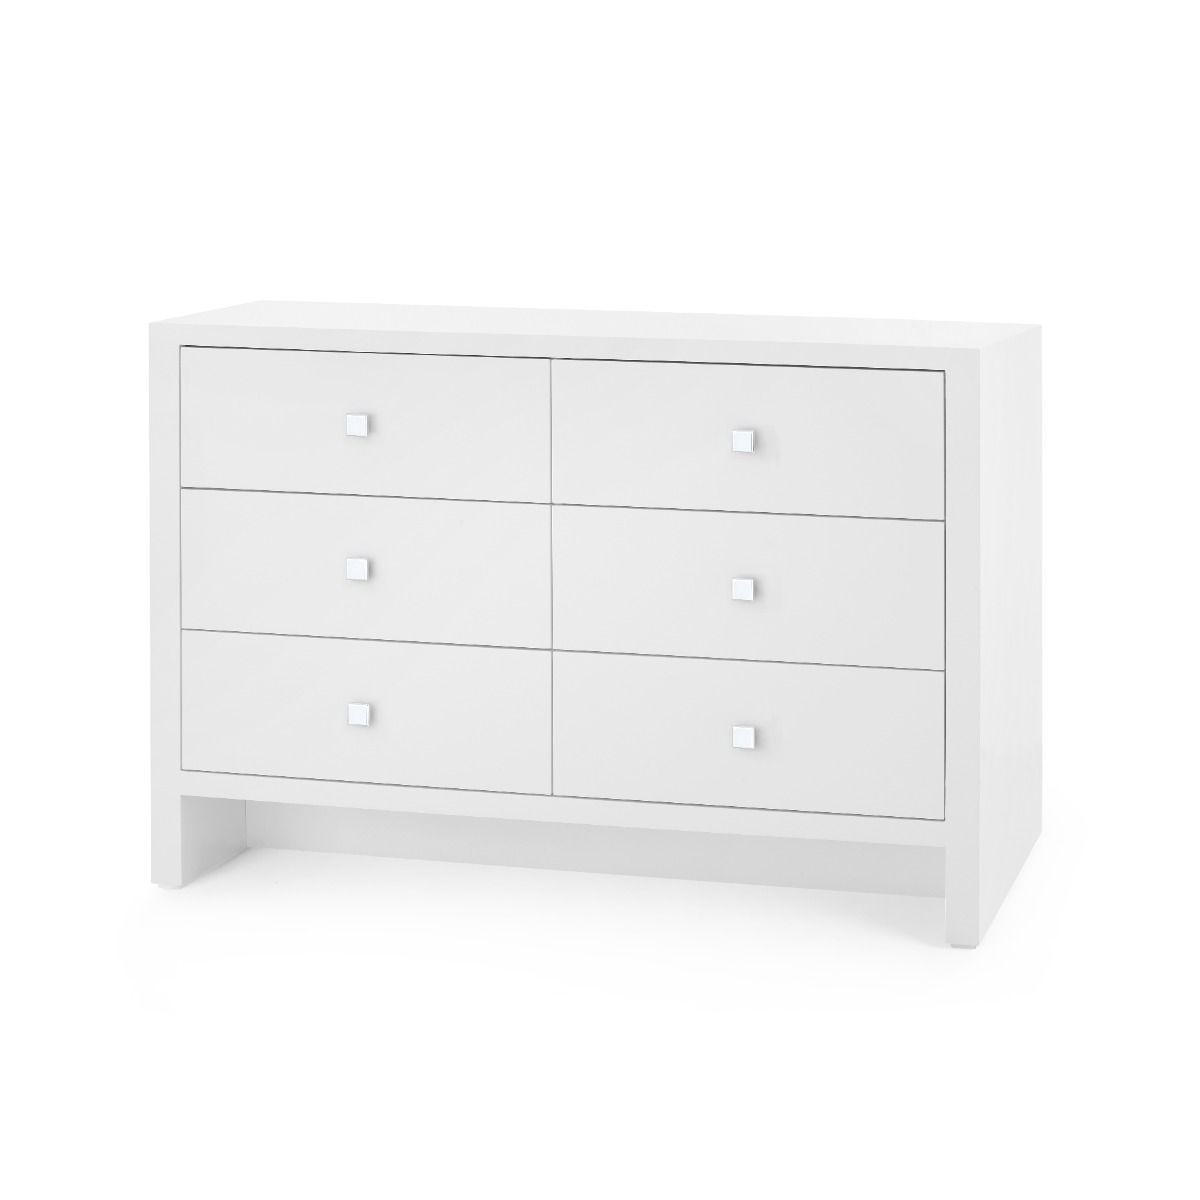 Morgan Extra Large 6 Drawer Chest Chiffon White - multiple options